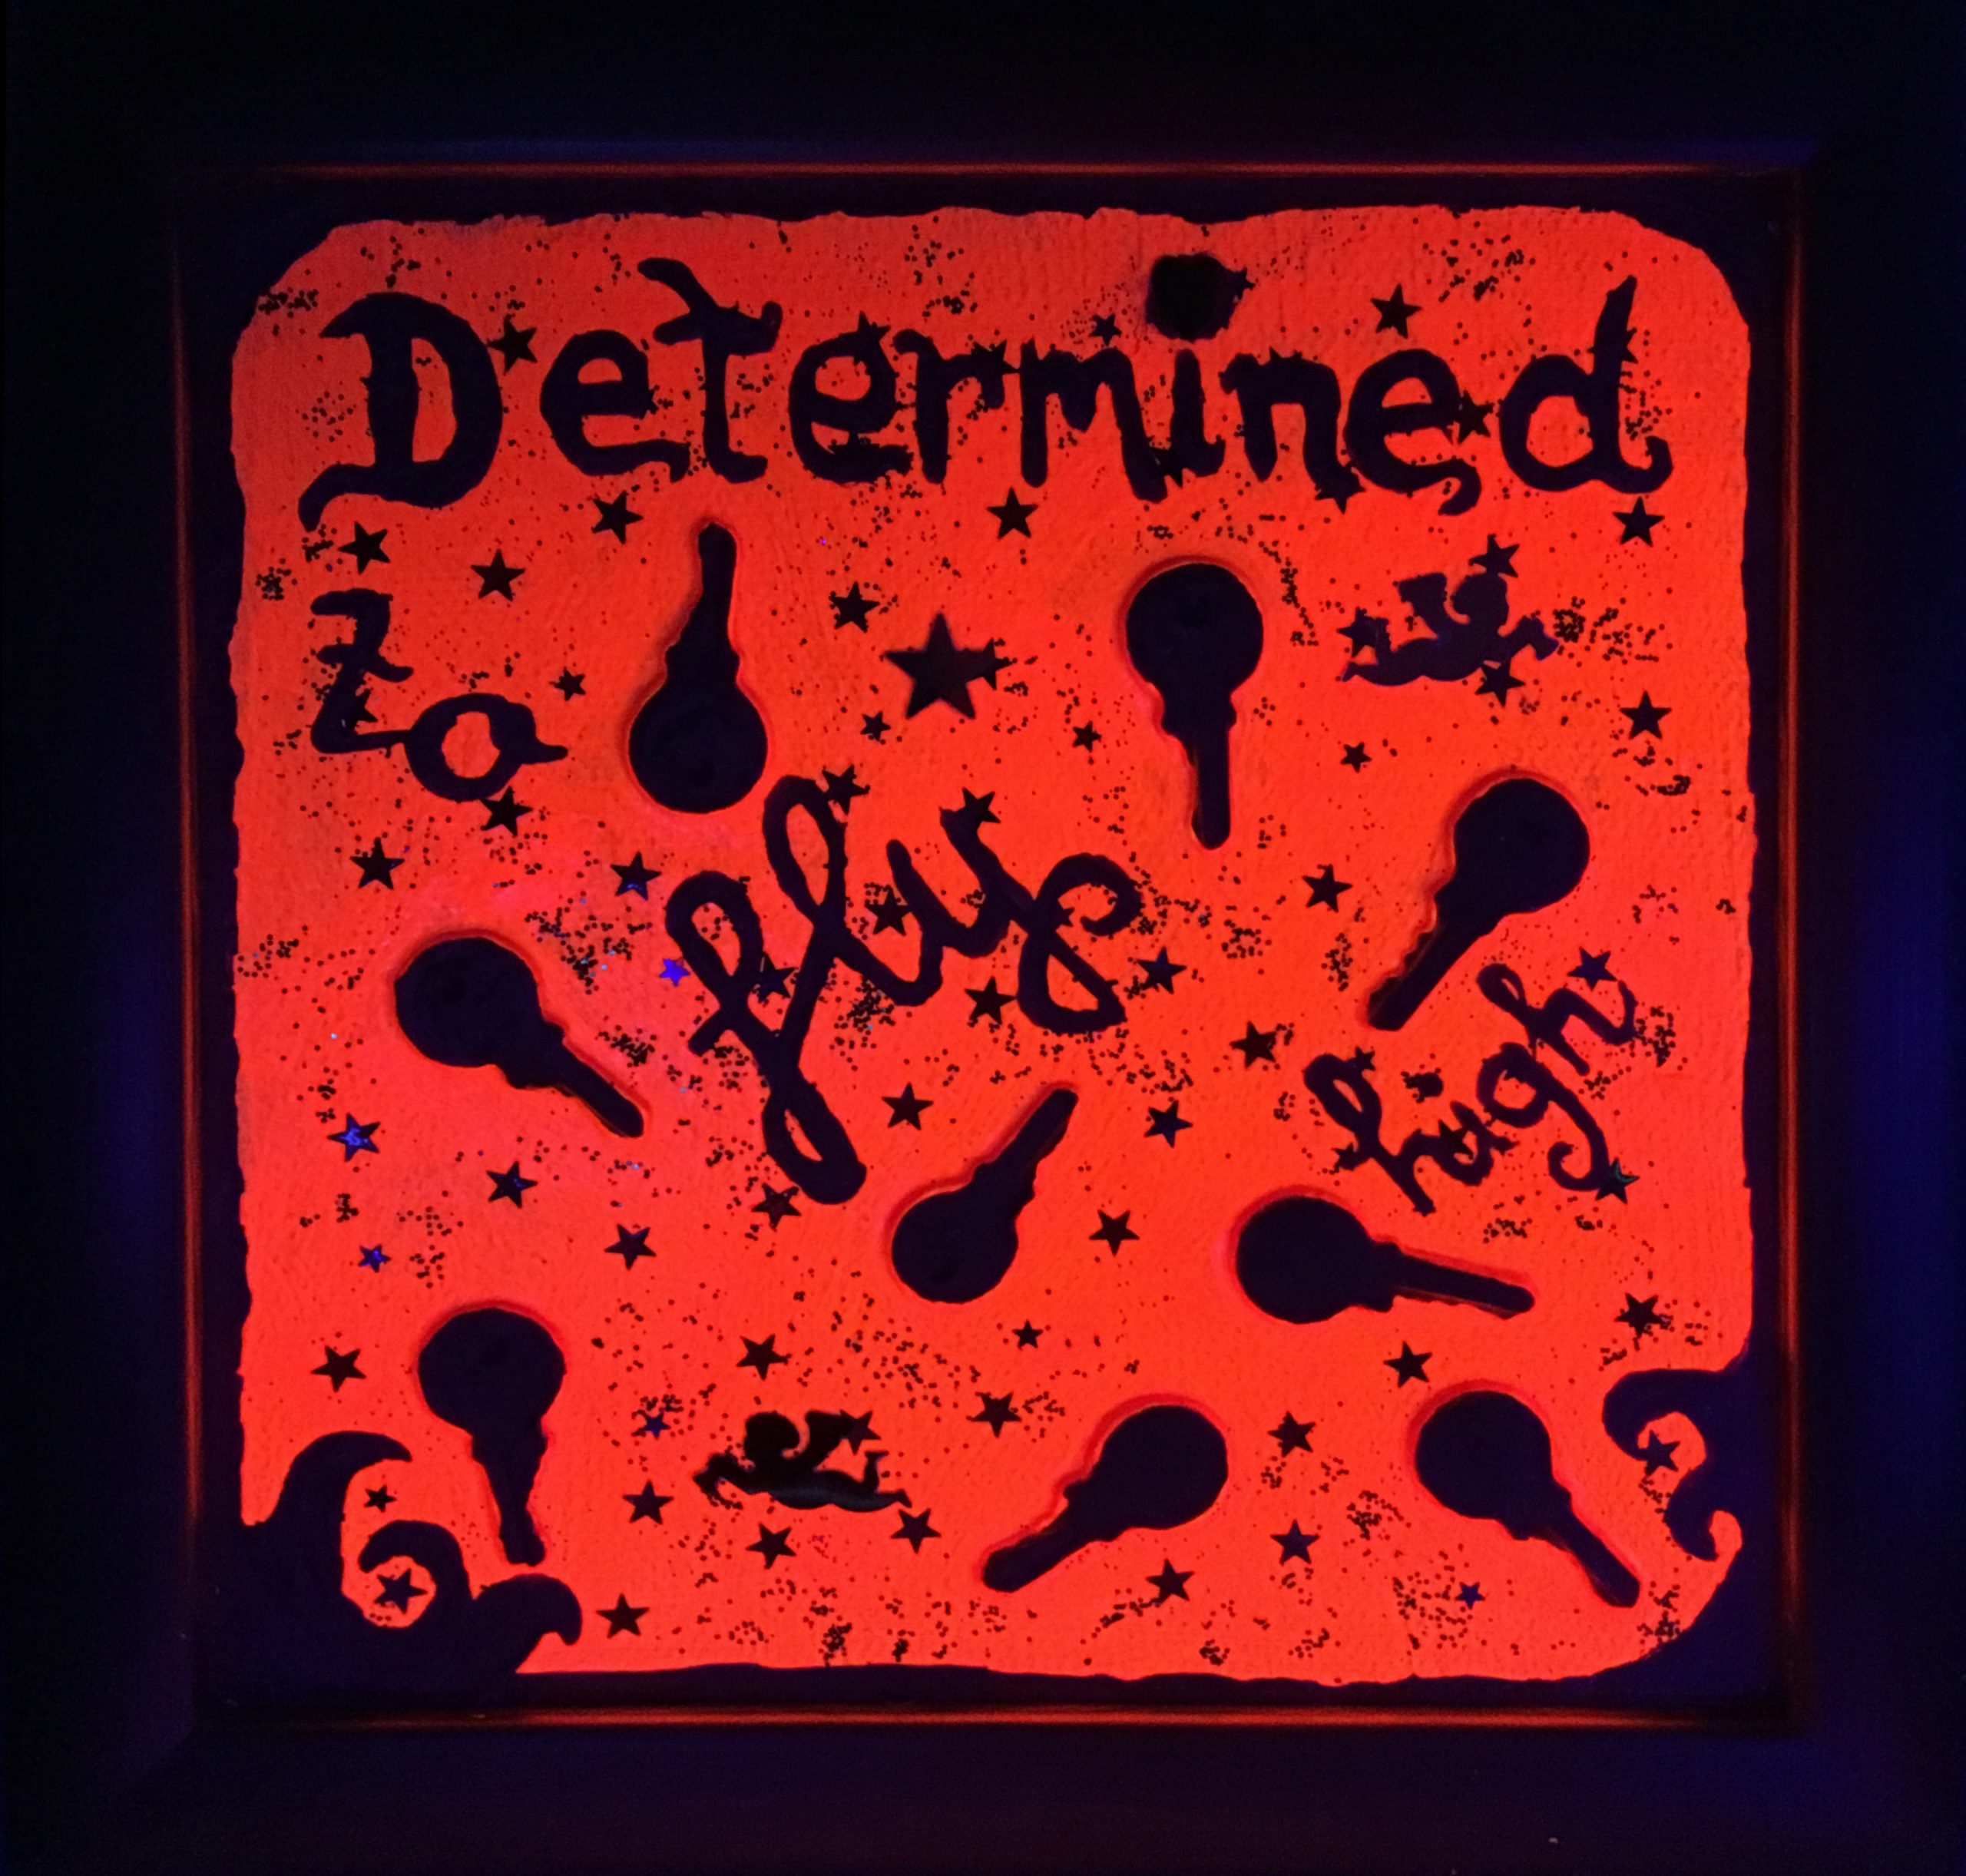 DETERMINED TO FLY (with neon light)